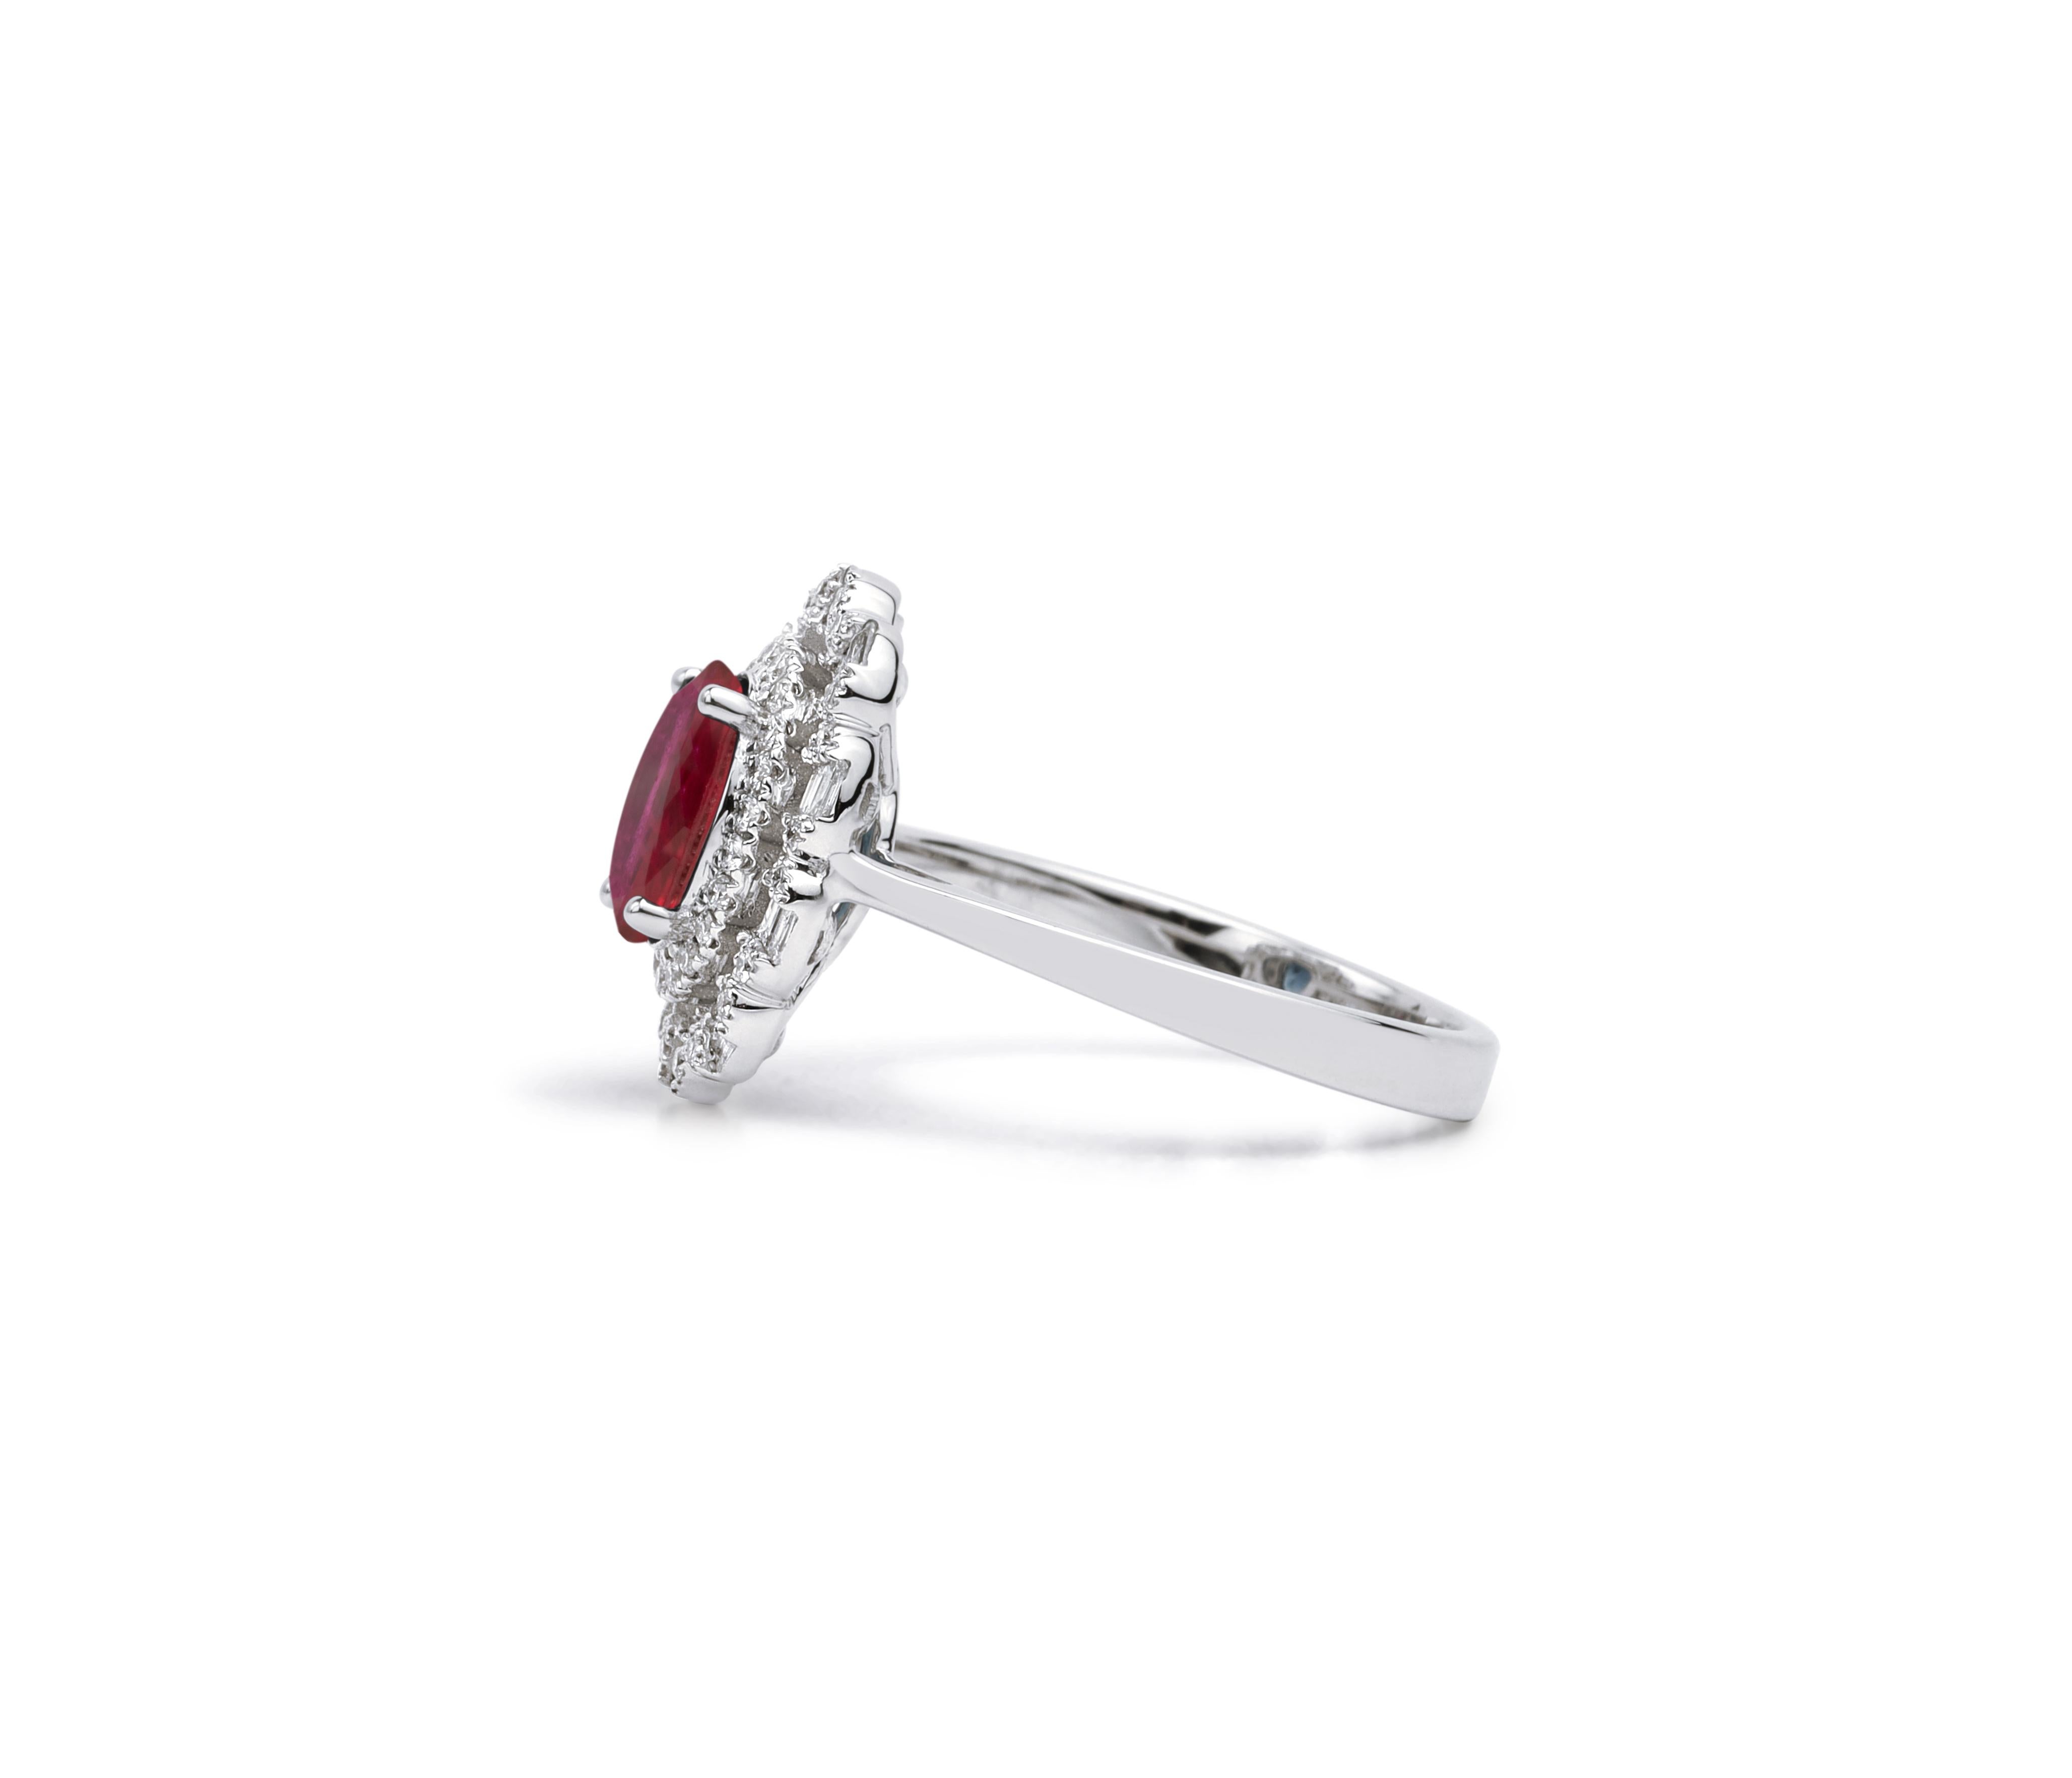 Oval Red Ruby Diamond Halo Cocktail Engagement Ring in 18 karat White Gold

Available in 18k white gold.

Same design can be made also with other custom gemstones per request.

Product details:

- Solid gold

- Diamond - approx. 0.4 carat

- Ruby -